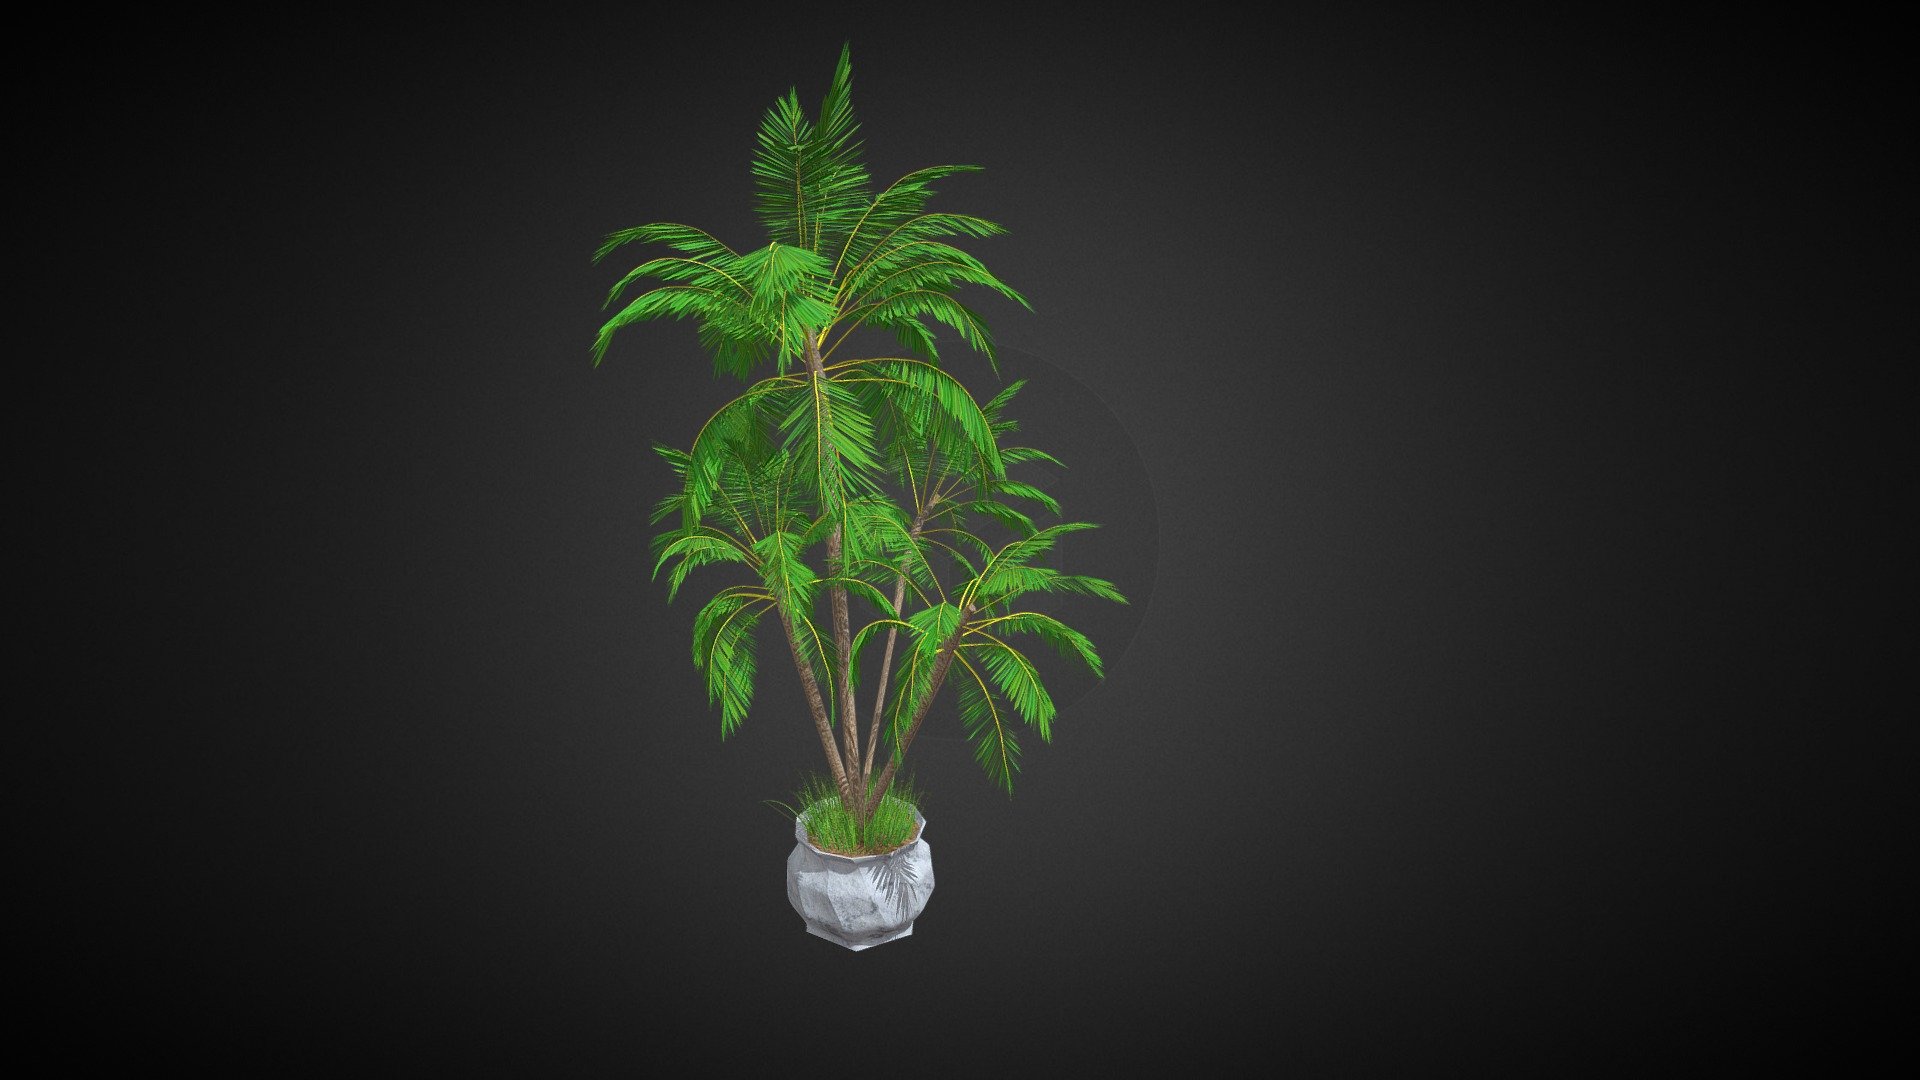 ***includes 4 palms+vase+grass
materials and textures are included.
3dsmax file with vray mt and its max version 2013 
Ohter formats materials are standard (fbx and obj format)
3 elements(grass + vase + 4palms)
-textures Format :PNG(2K)

dimension : 2.52.64 meters
polygon counts(total Elements):325k
vertex counts: 525k
Regards** - 4 palms + vase + grass - 3D model by kingdesigner 3d model